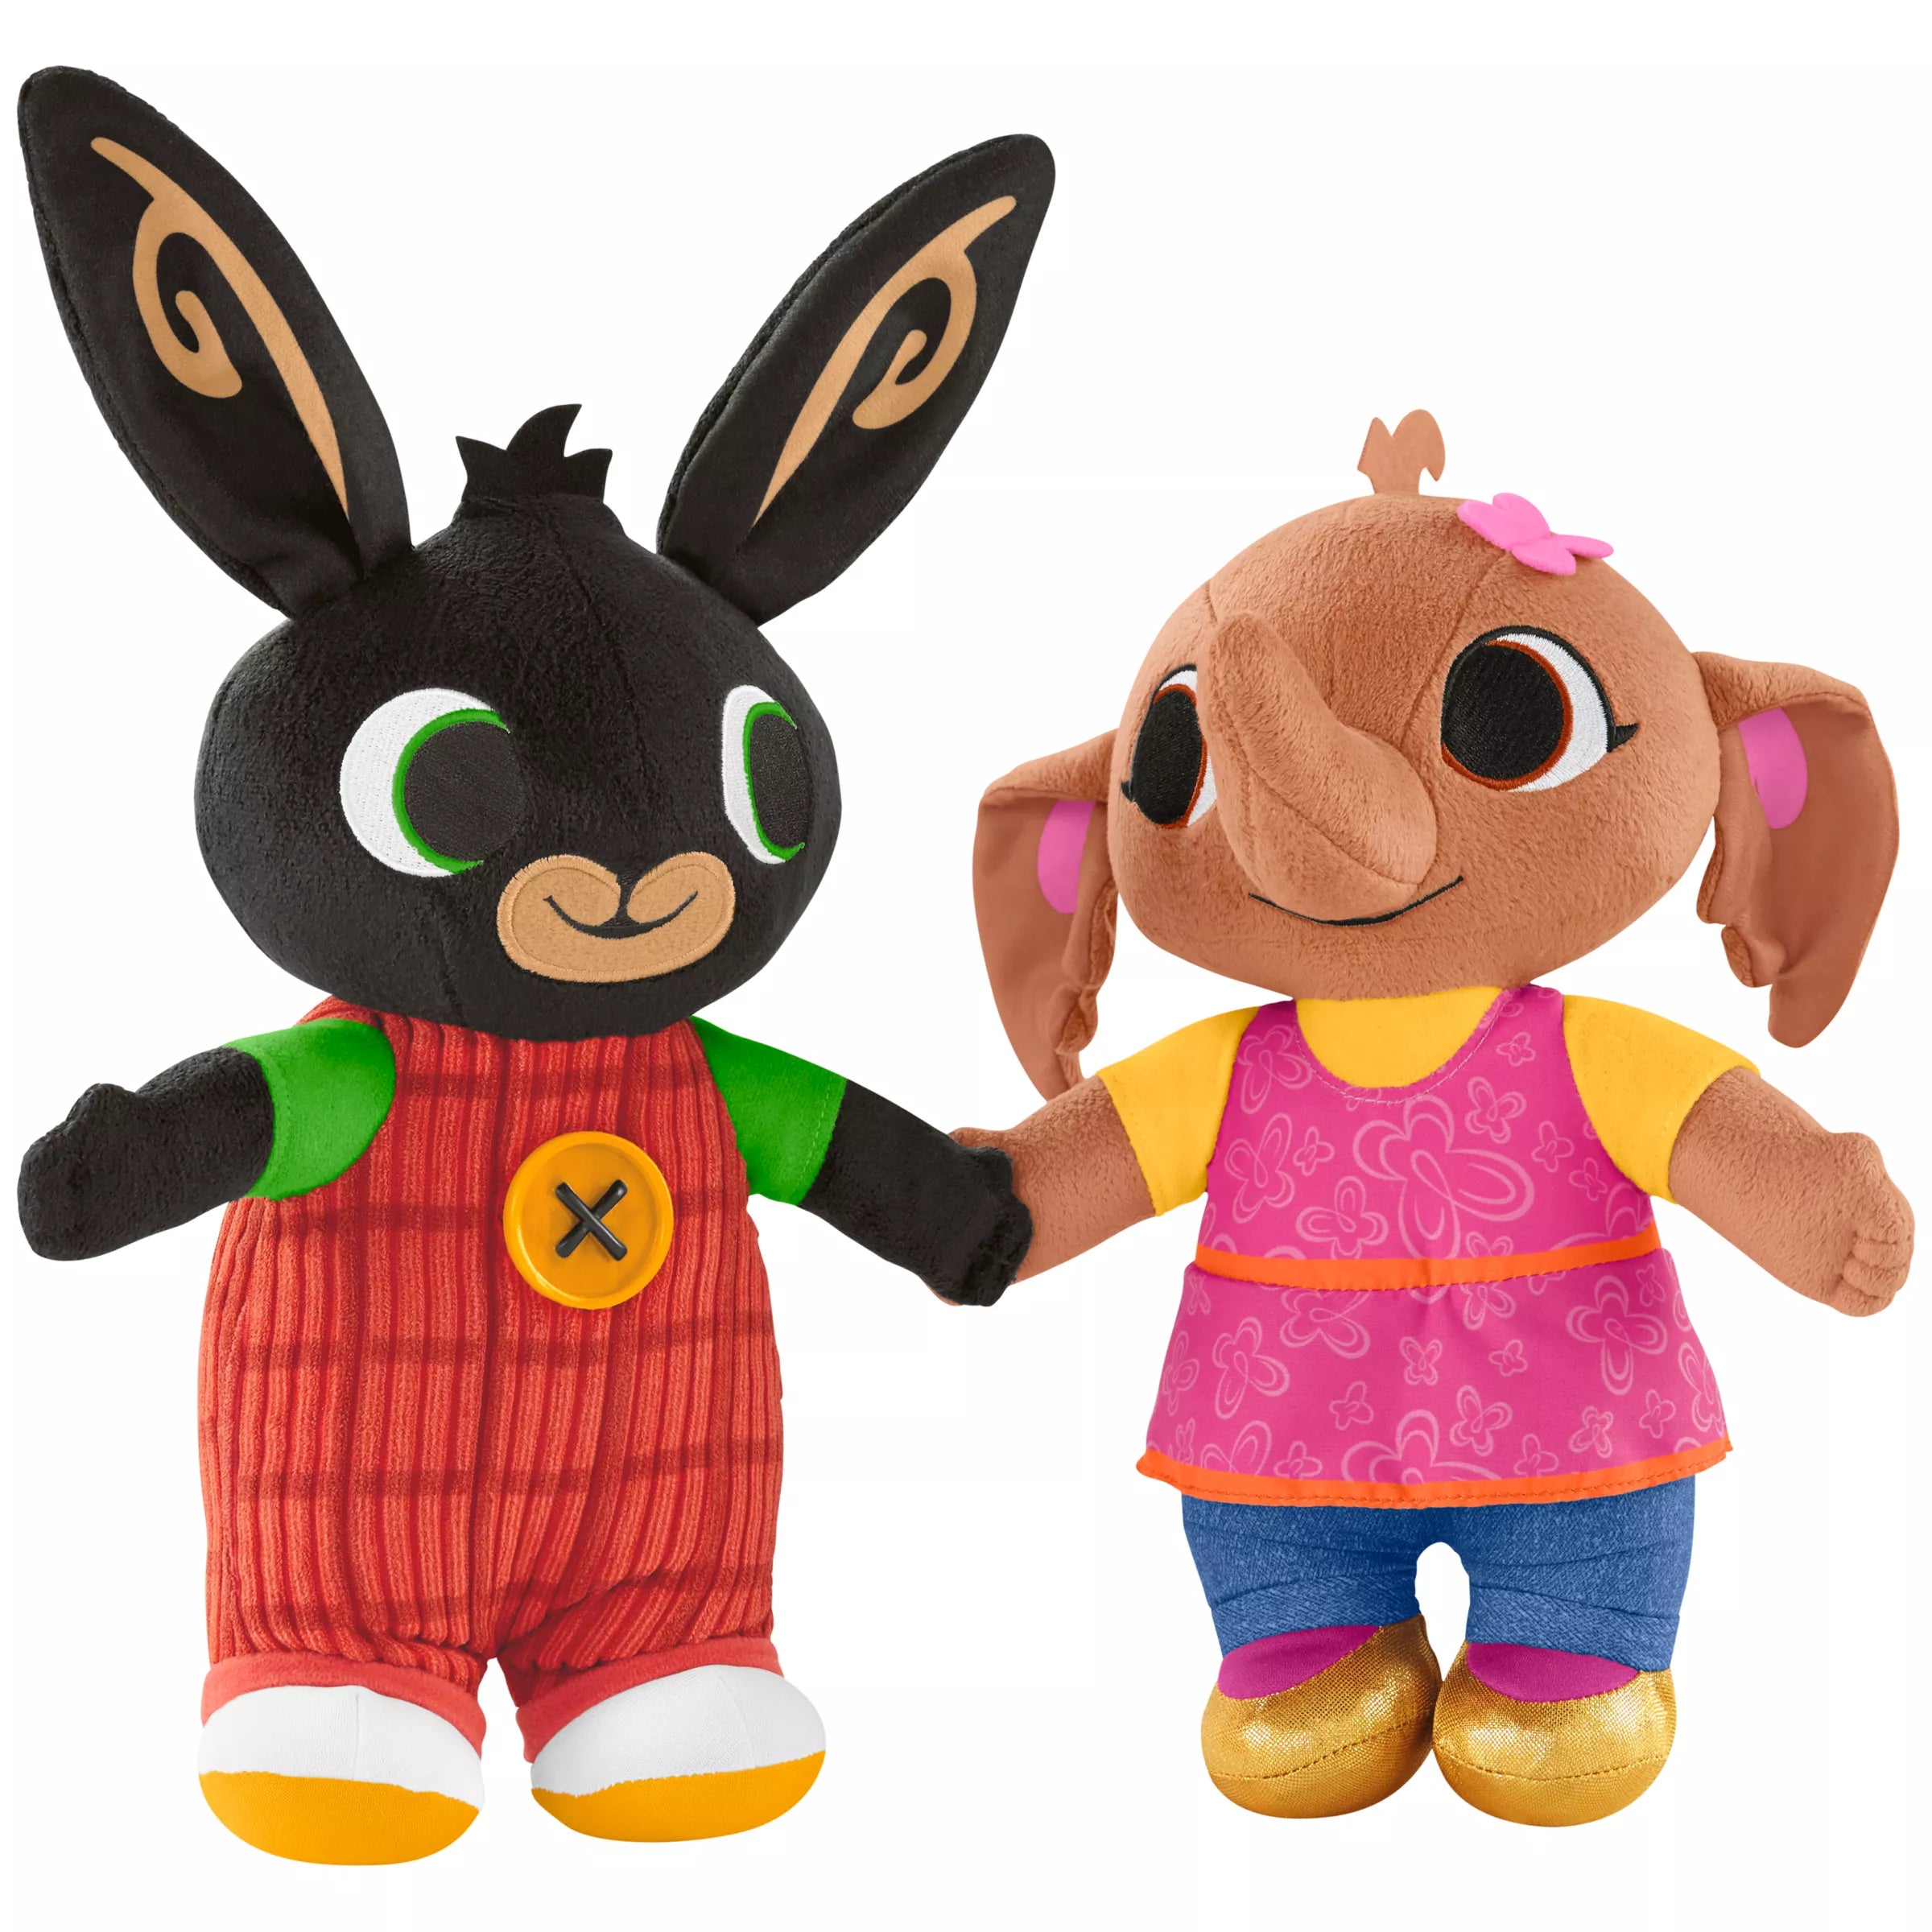 Bing and Sula Soft Toys Assorted